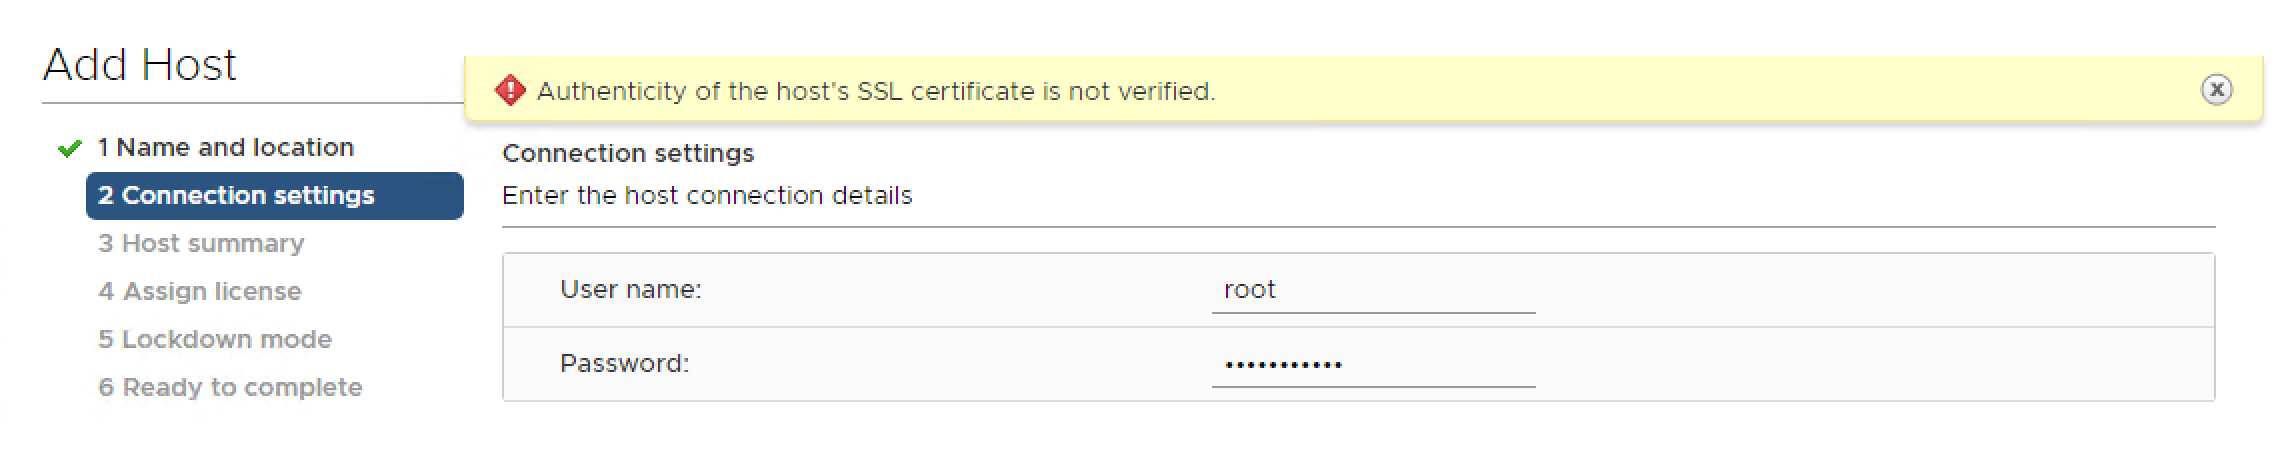 Troubleshooting: Cannot Add host “Authenticity of the host’s SSL certificate is not verified”.